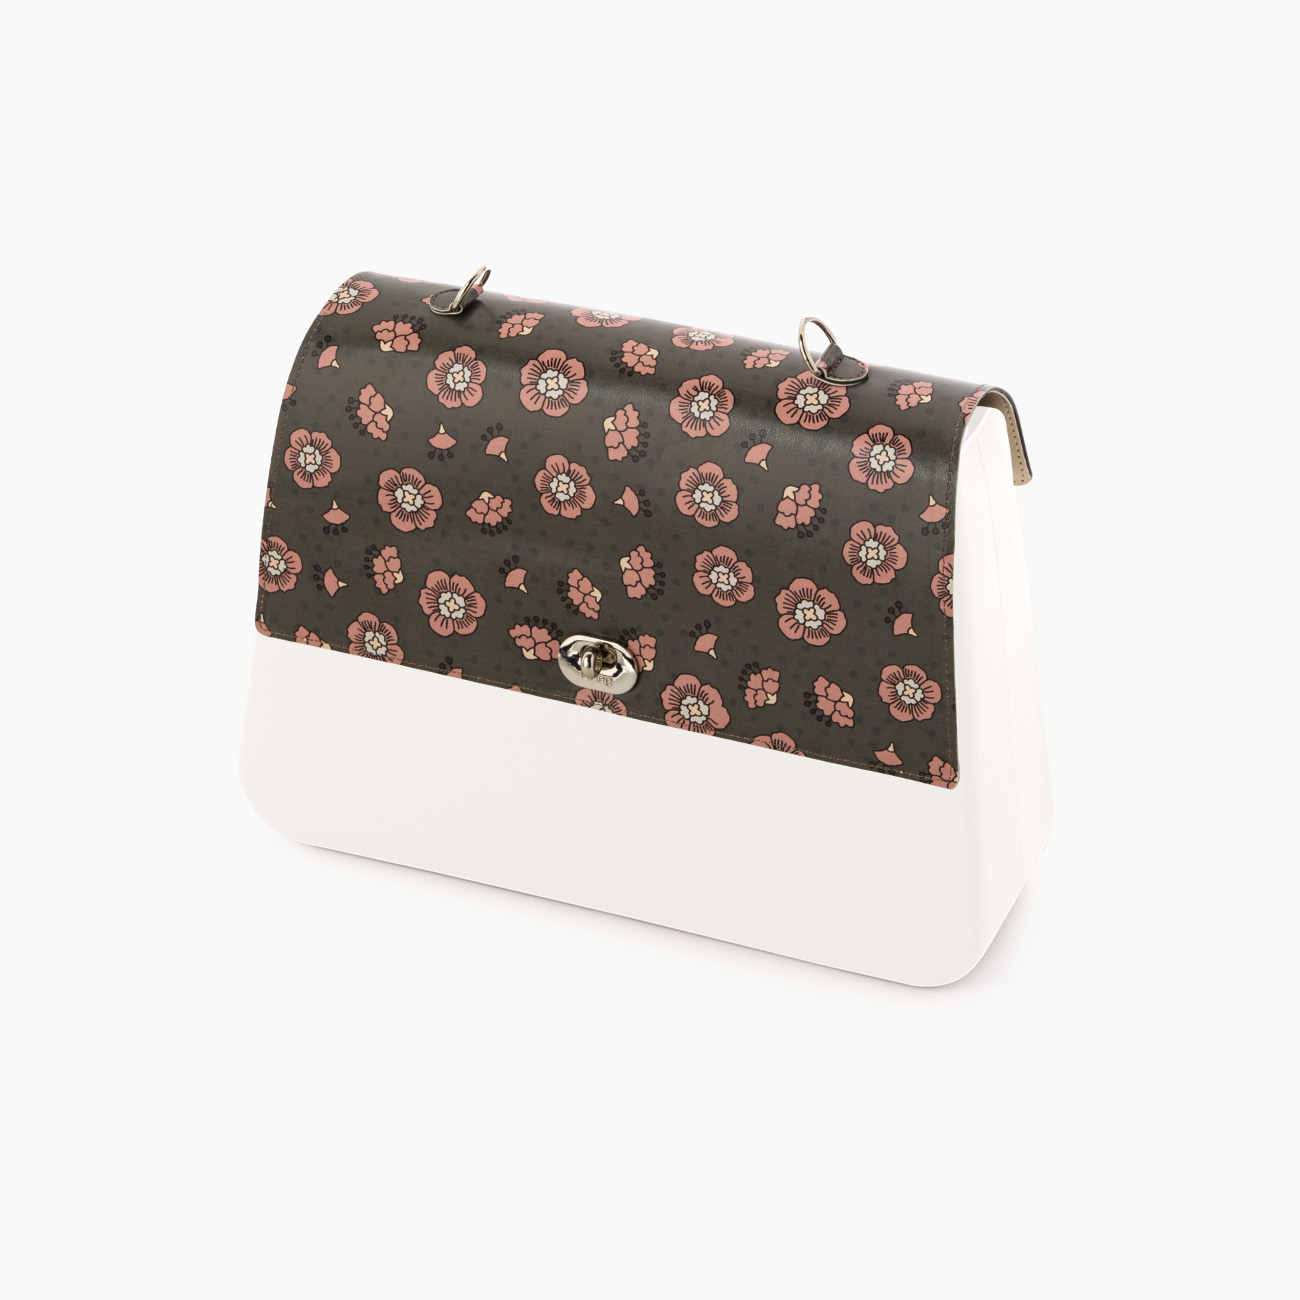 O Bag Queen Flap with Pocket Dianthus Print Eco Leather